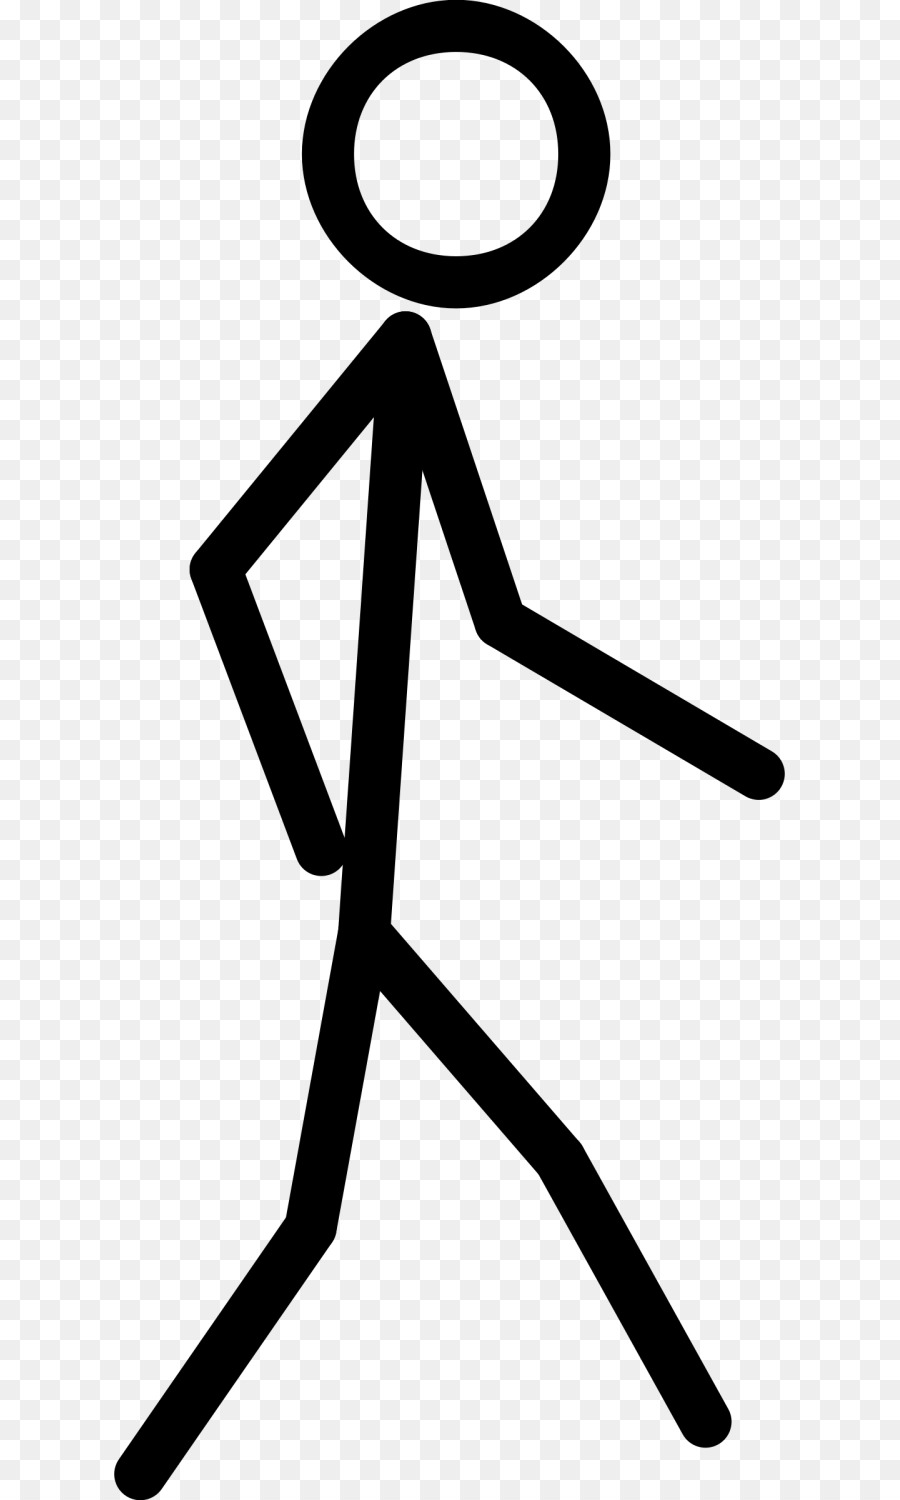 Stick figure Portable Network Graphics Clip art Transparency Vector graphics - approachability png figure png download - 671*1500 - Free Transparent Stick Figure png Download.